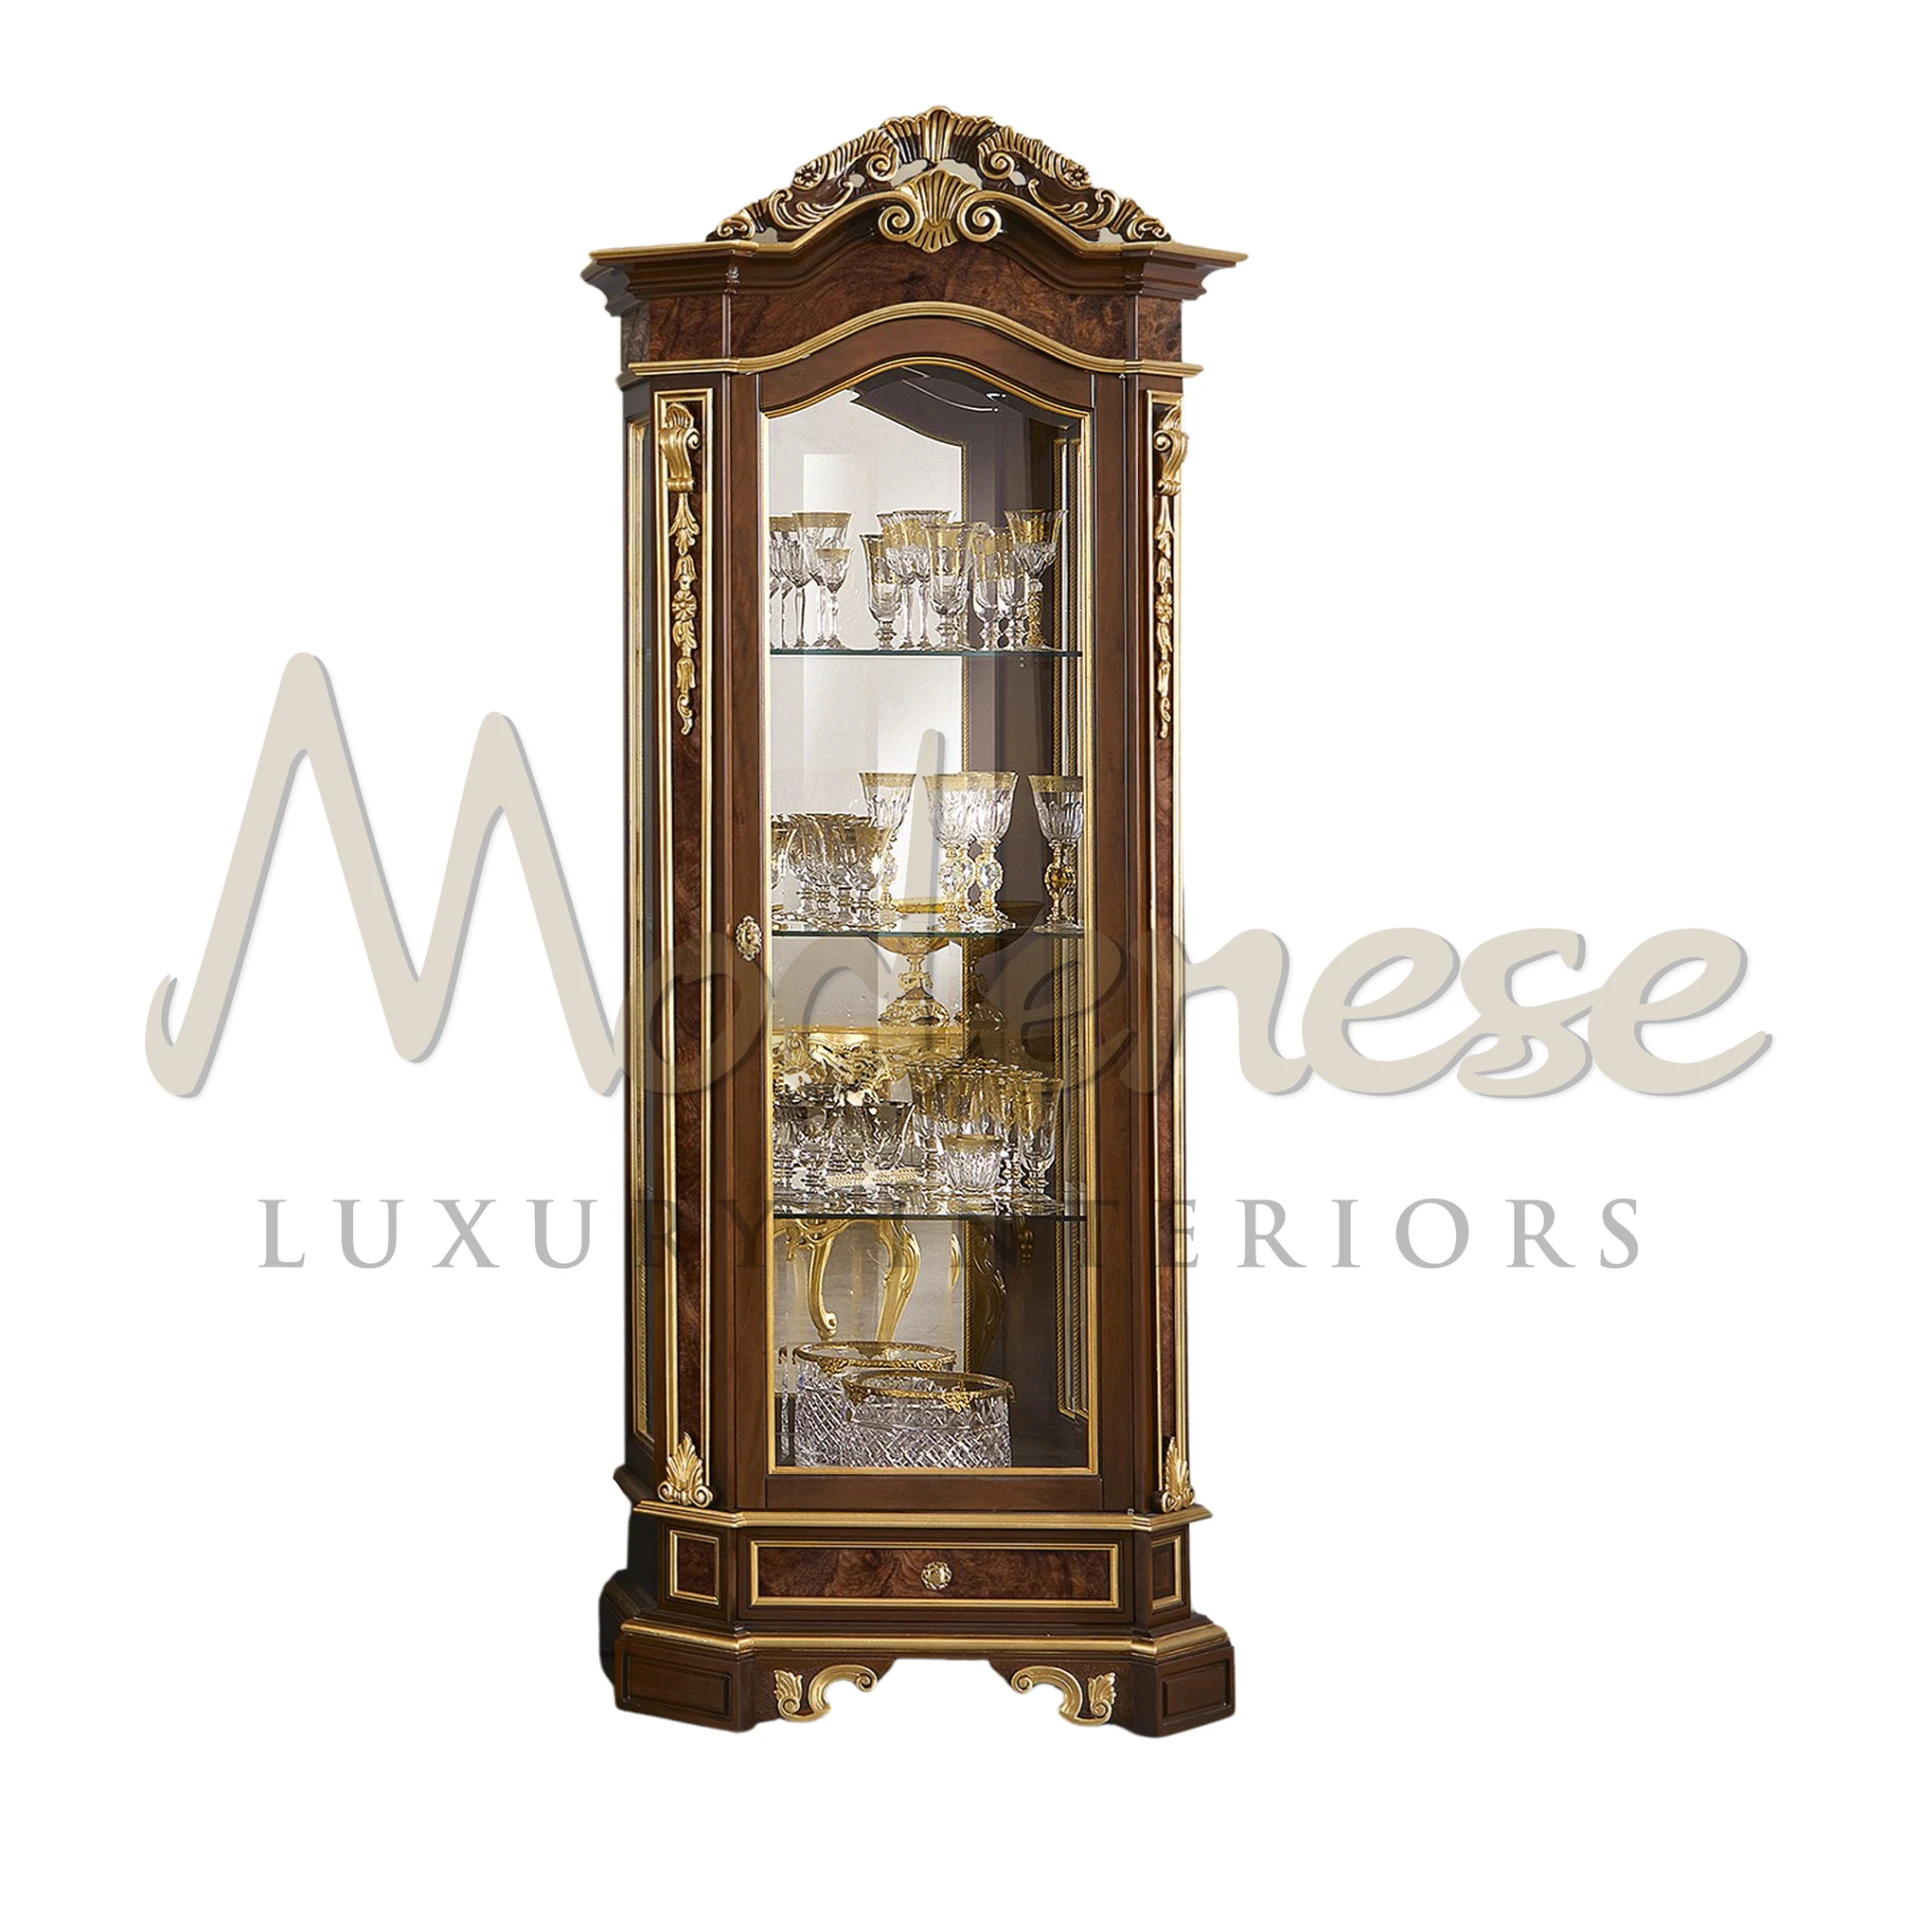 A classic-looking baroque design one door cabinet with one glass door and golden touches